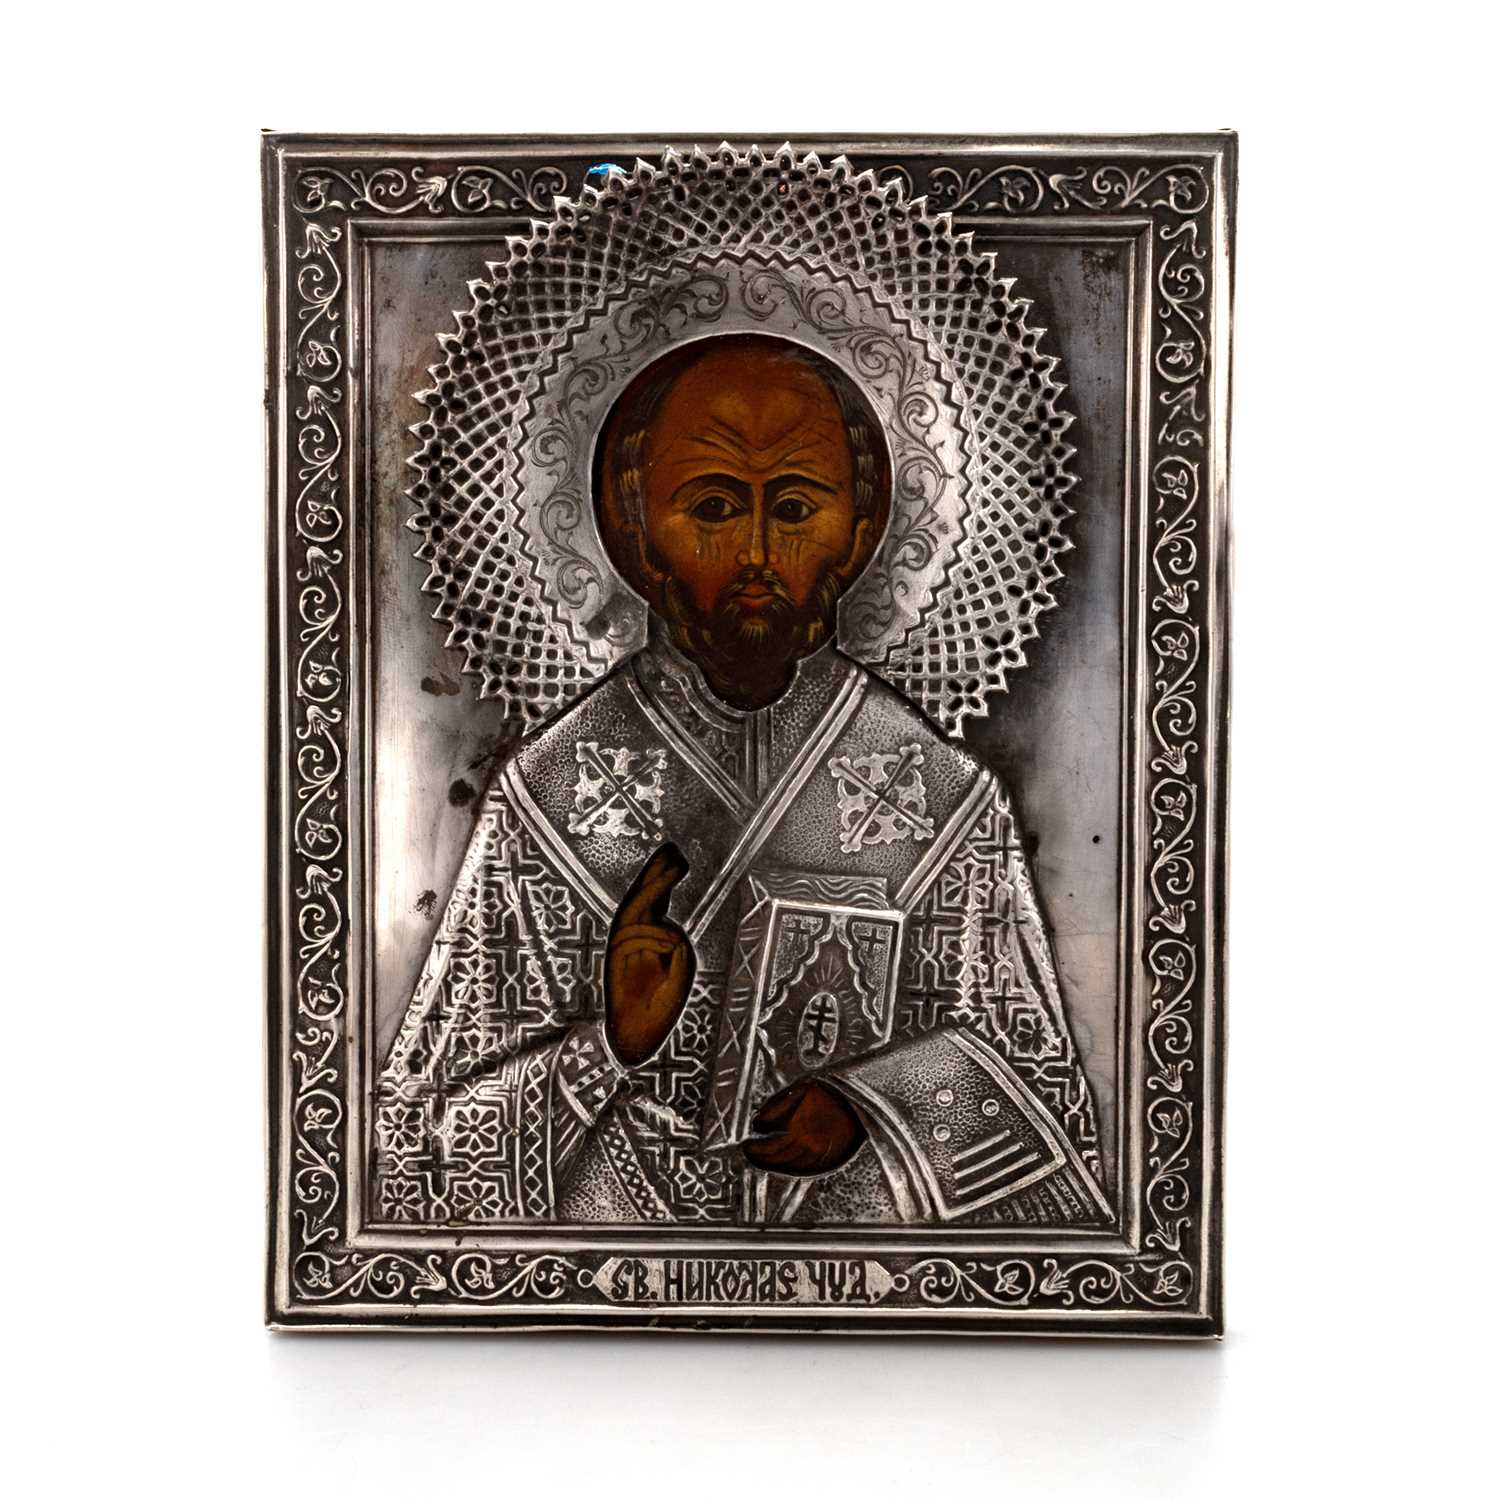 A LATE 19TH CENTURY SILVER-MOUNTED RUSSIAN ICON